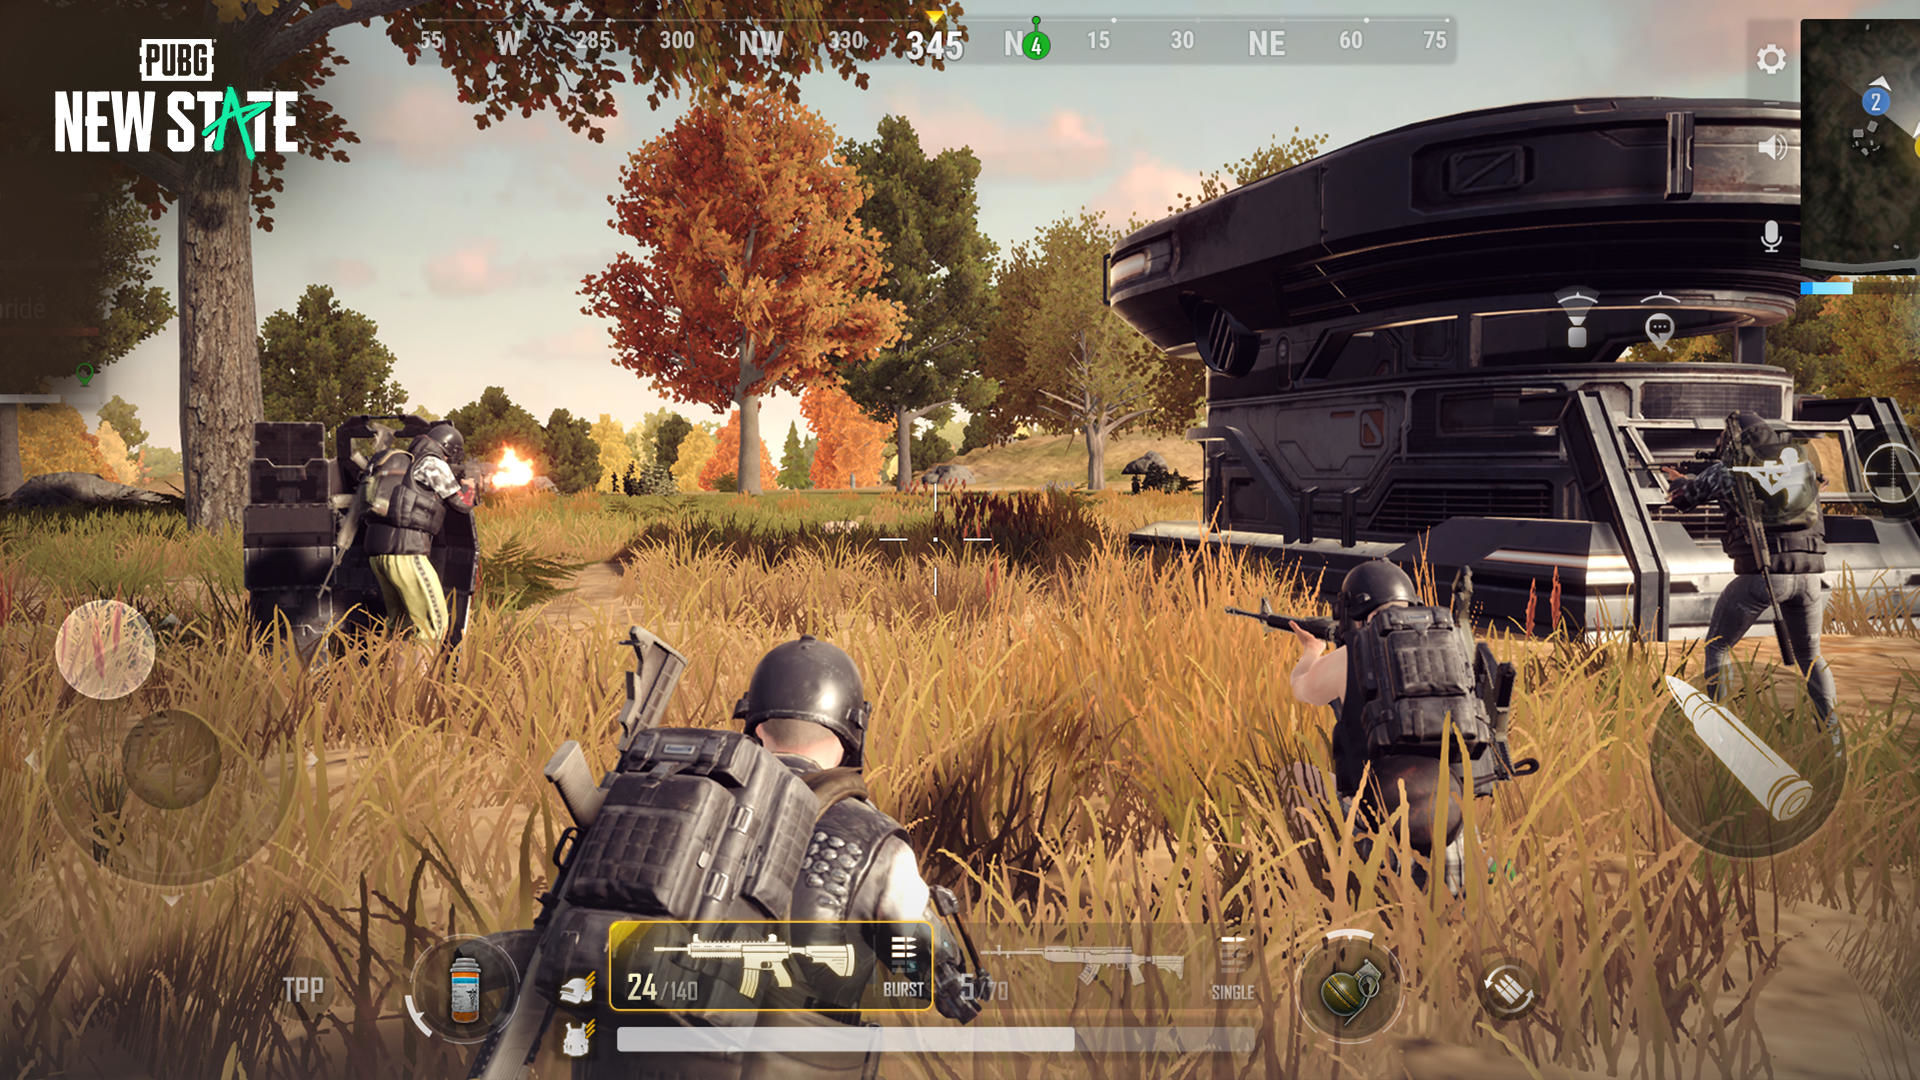 Tencents best ever emulator for pubg фото 85